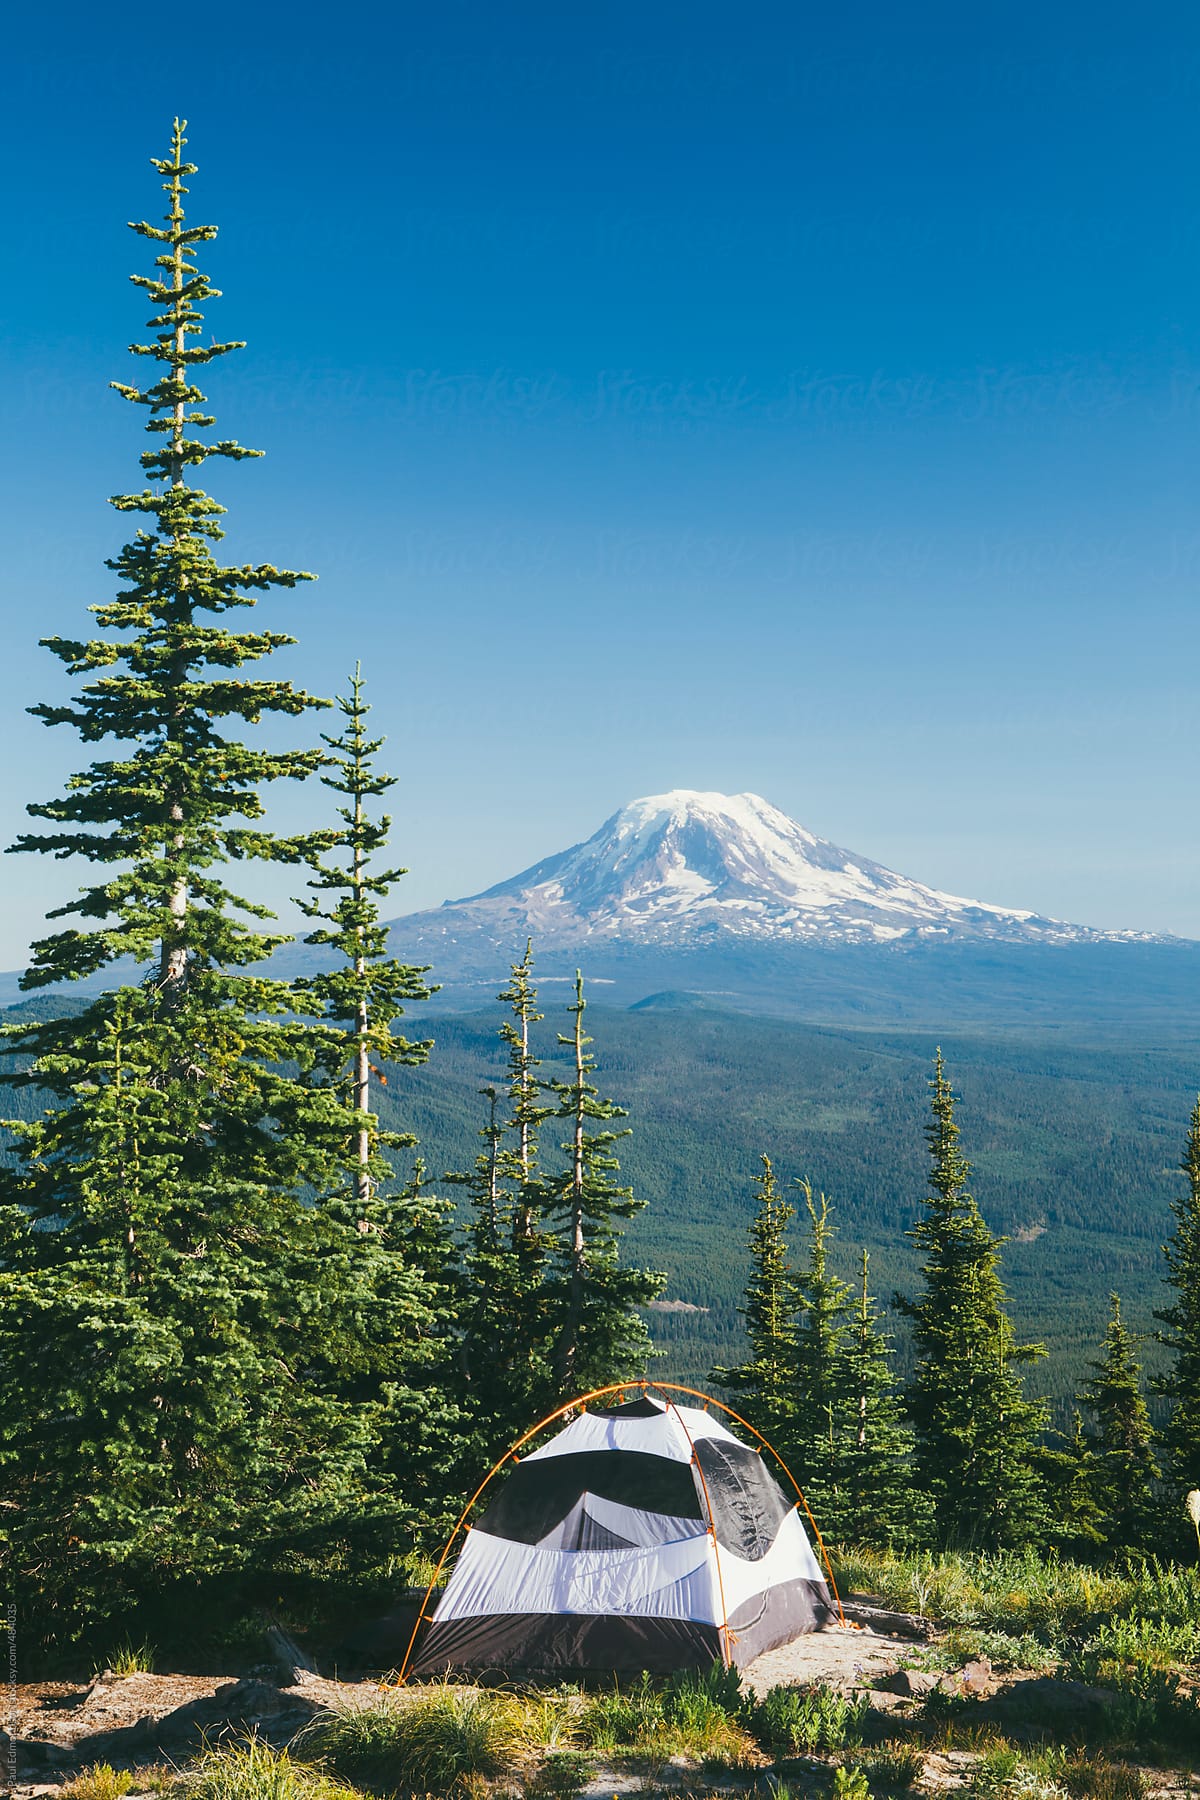 Camping tent in alpine meadow, overlooking lush forest, Mt. Adams in distance